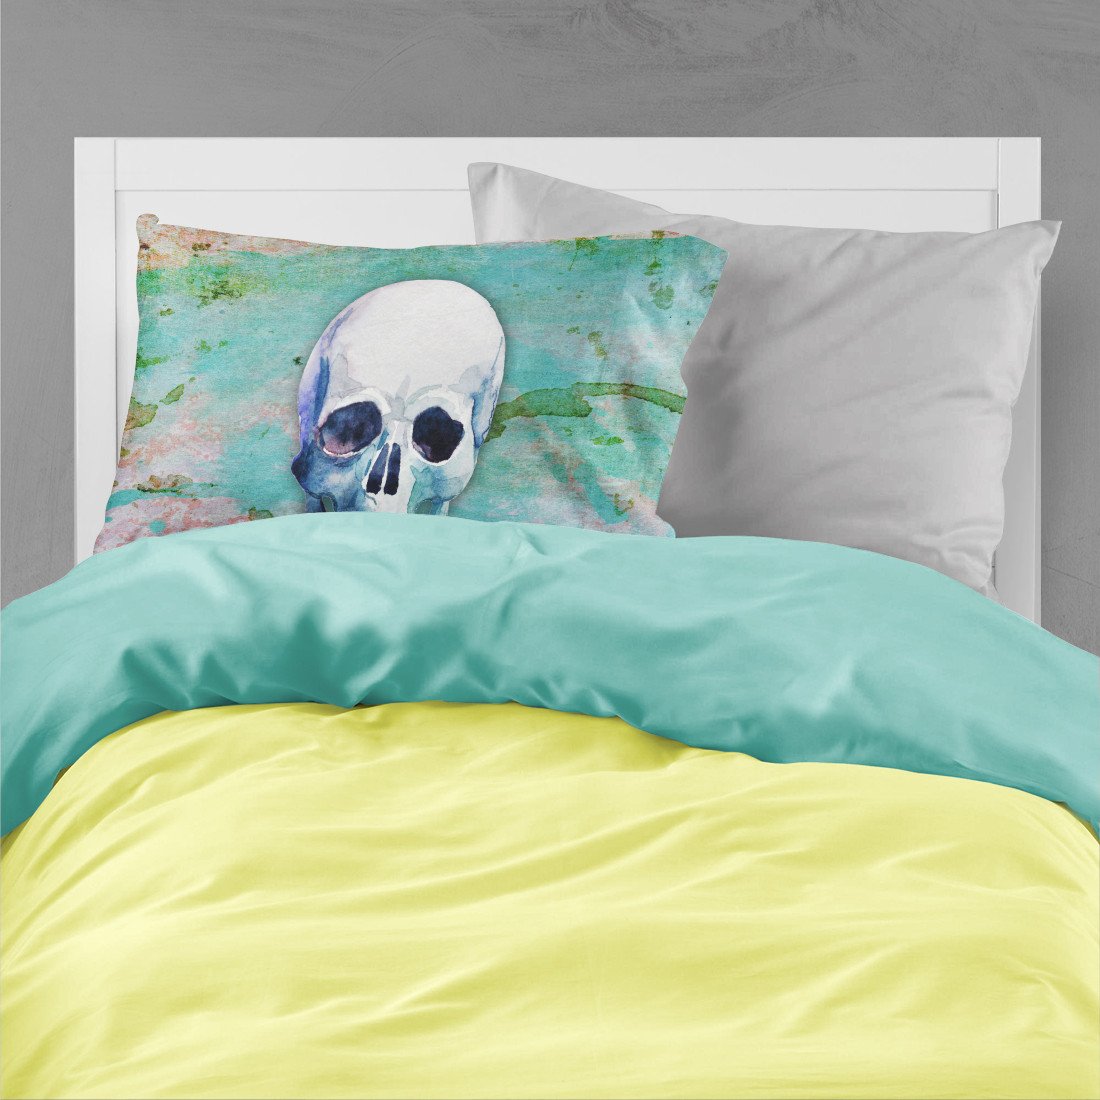 Day of the Dead Teal Skull Fabric Standard Pillowcase BB5123PILLOWCASE by Caroline's Treasures